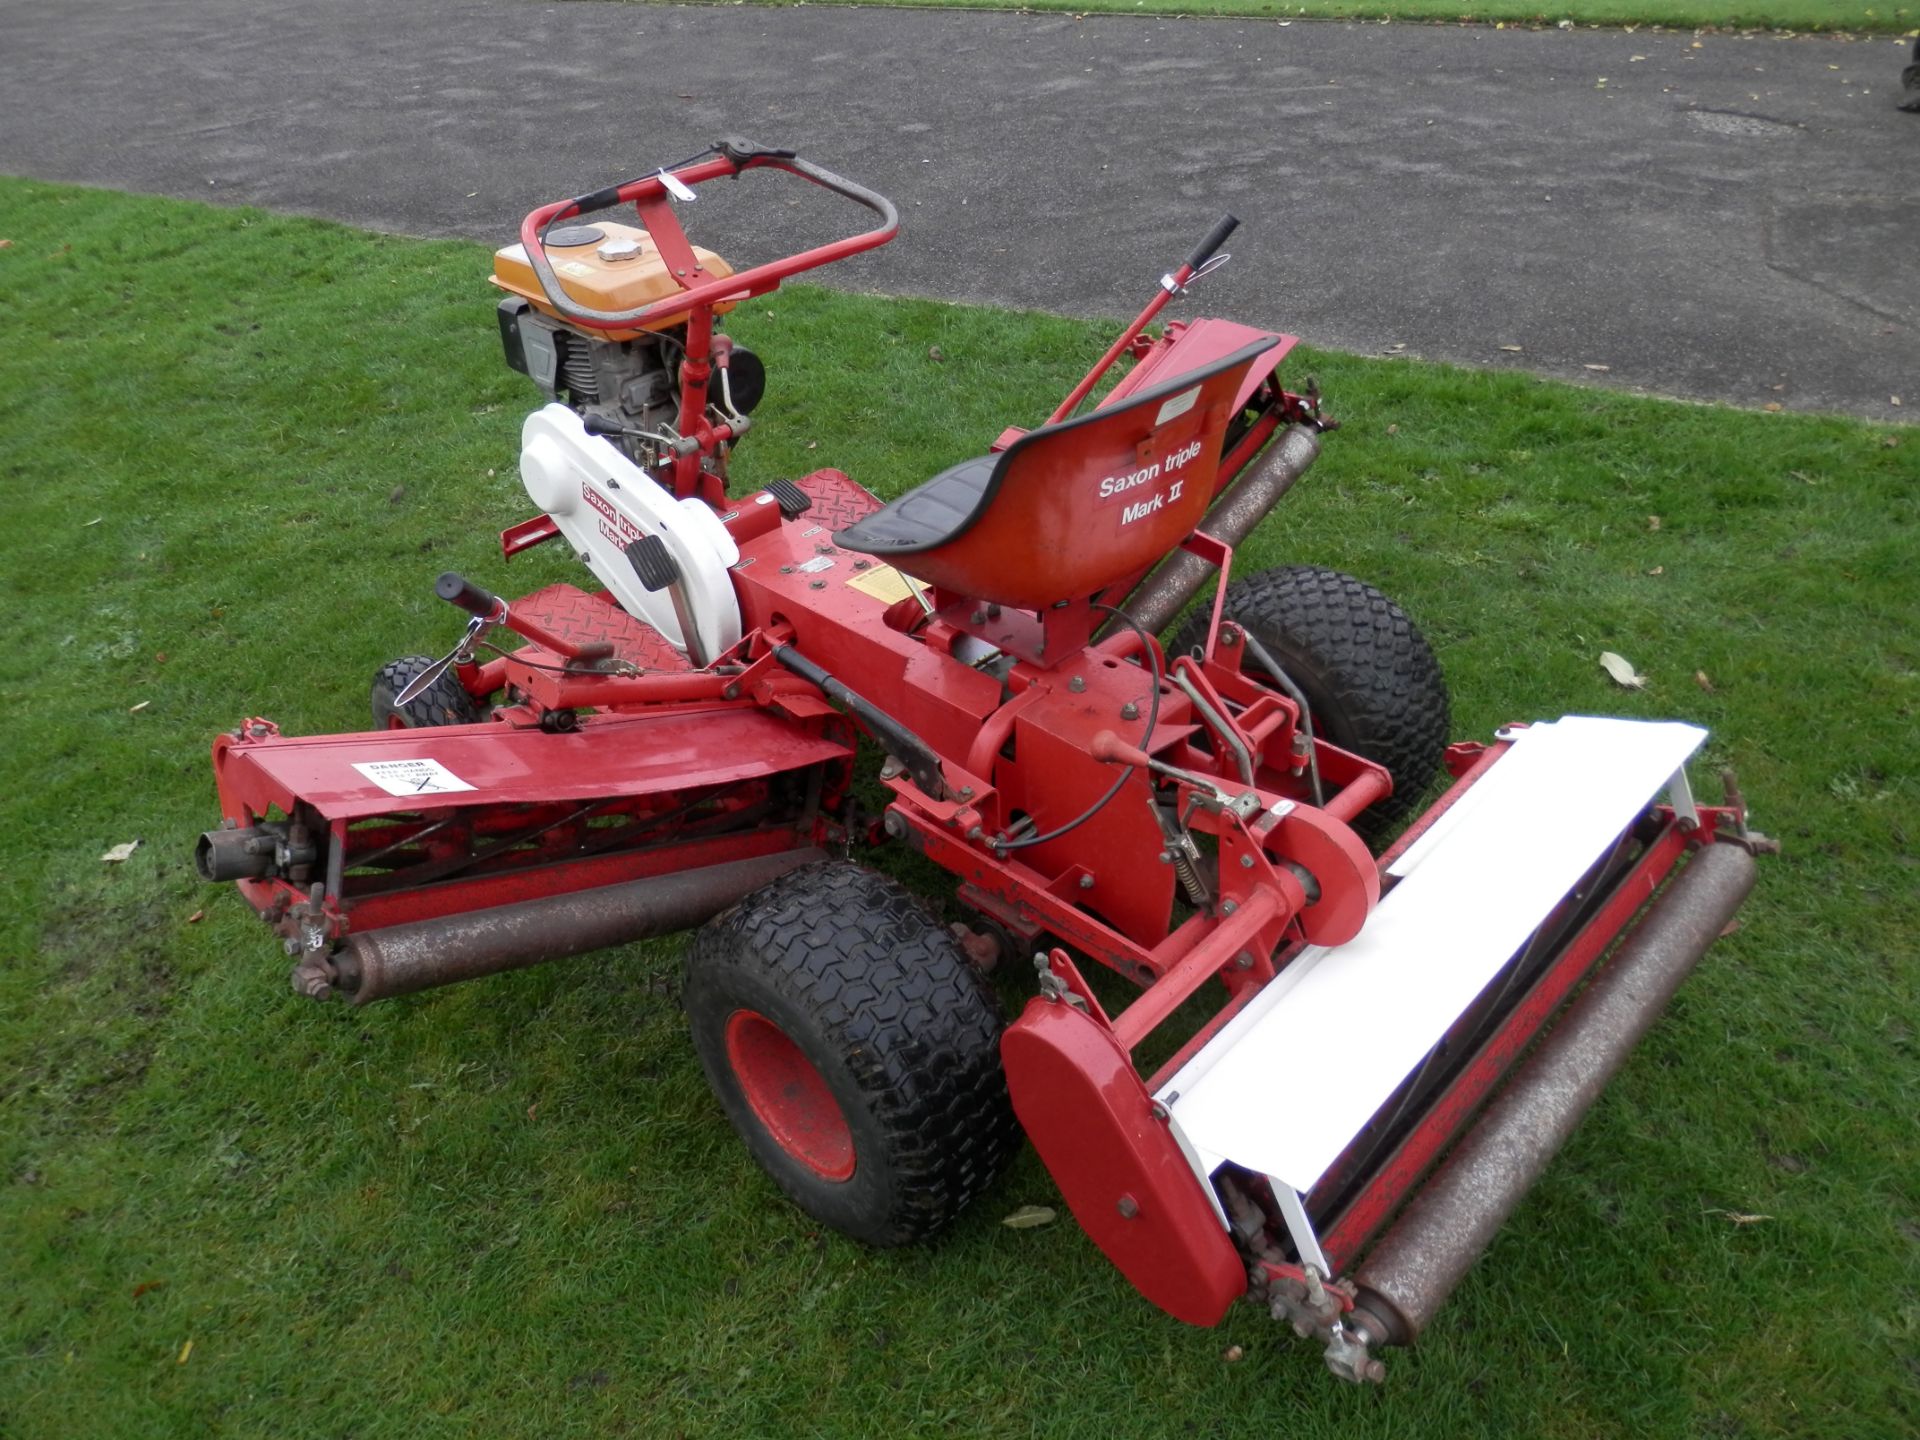 ALL WORKING SAXON TRIPLE MK2 RIDE ON MOWER, UPGRADED WITH GEARS, BRAKE PEDAL & DIFF LOCK. - Image 3 of 14